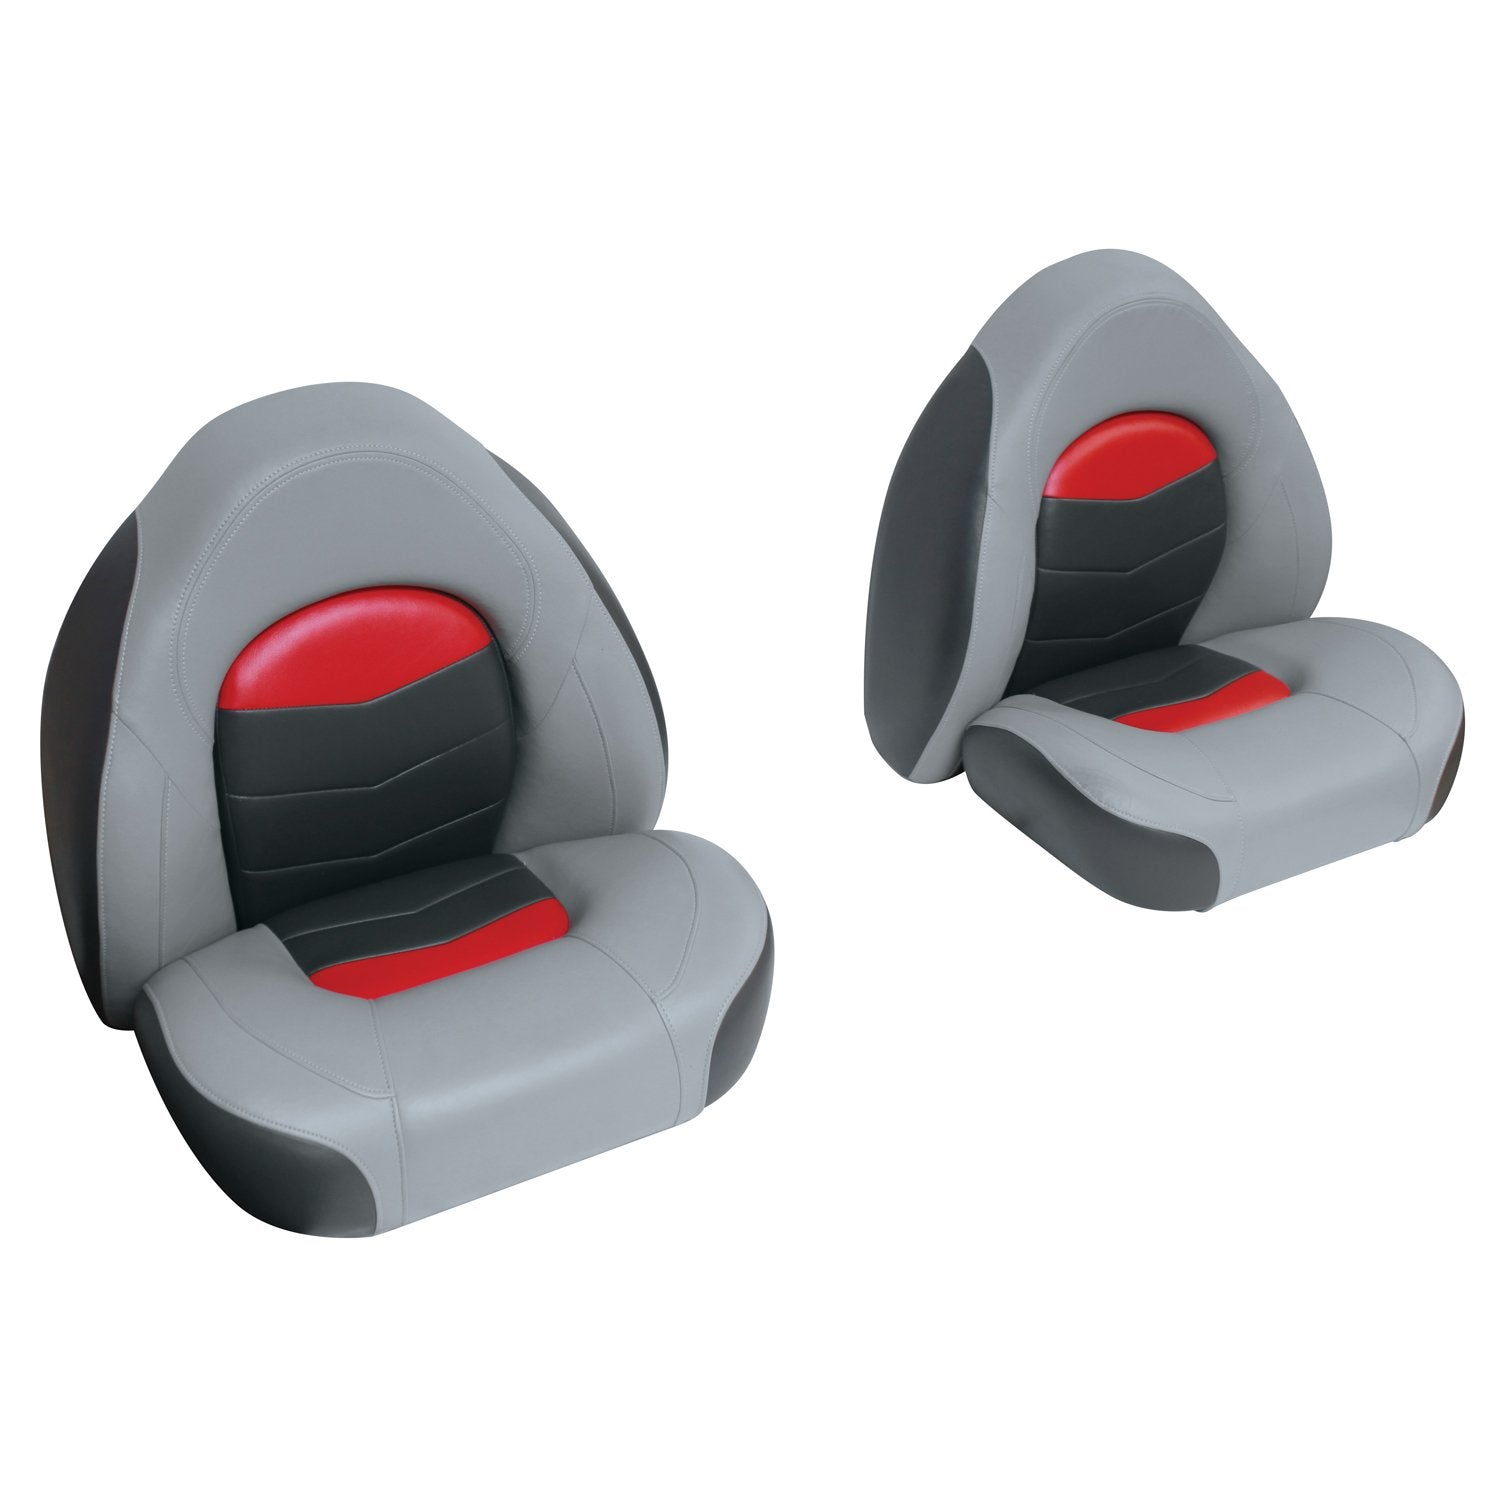 305 Bass Boat Seats - Sold In Pairs Only